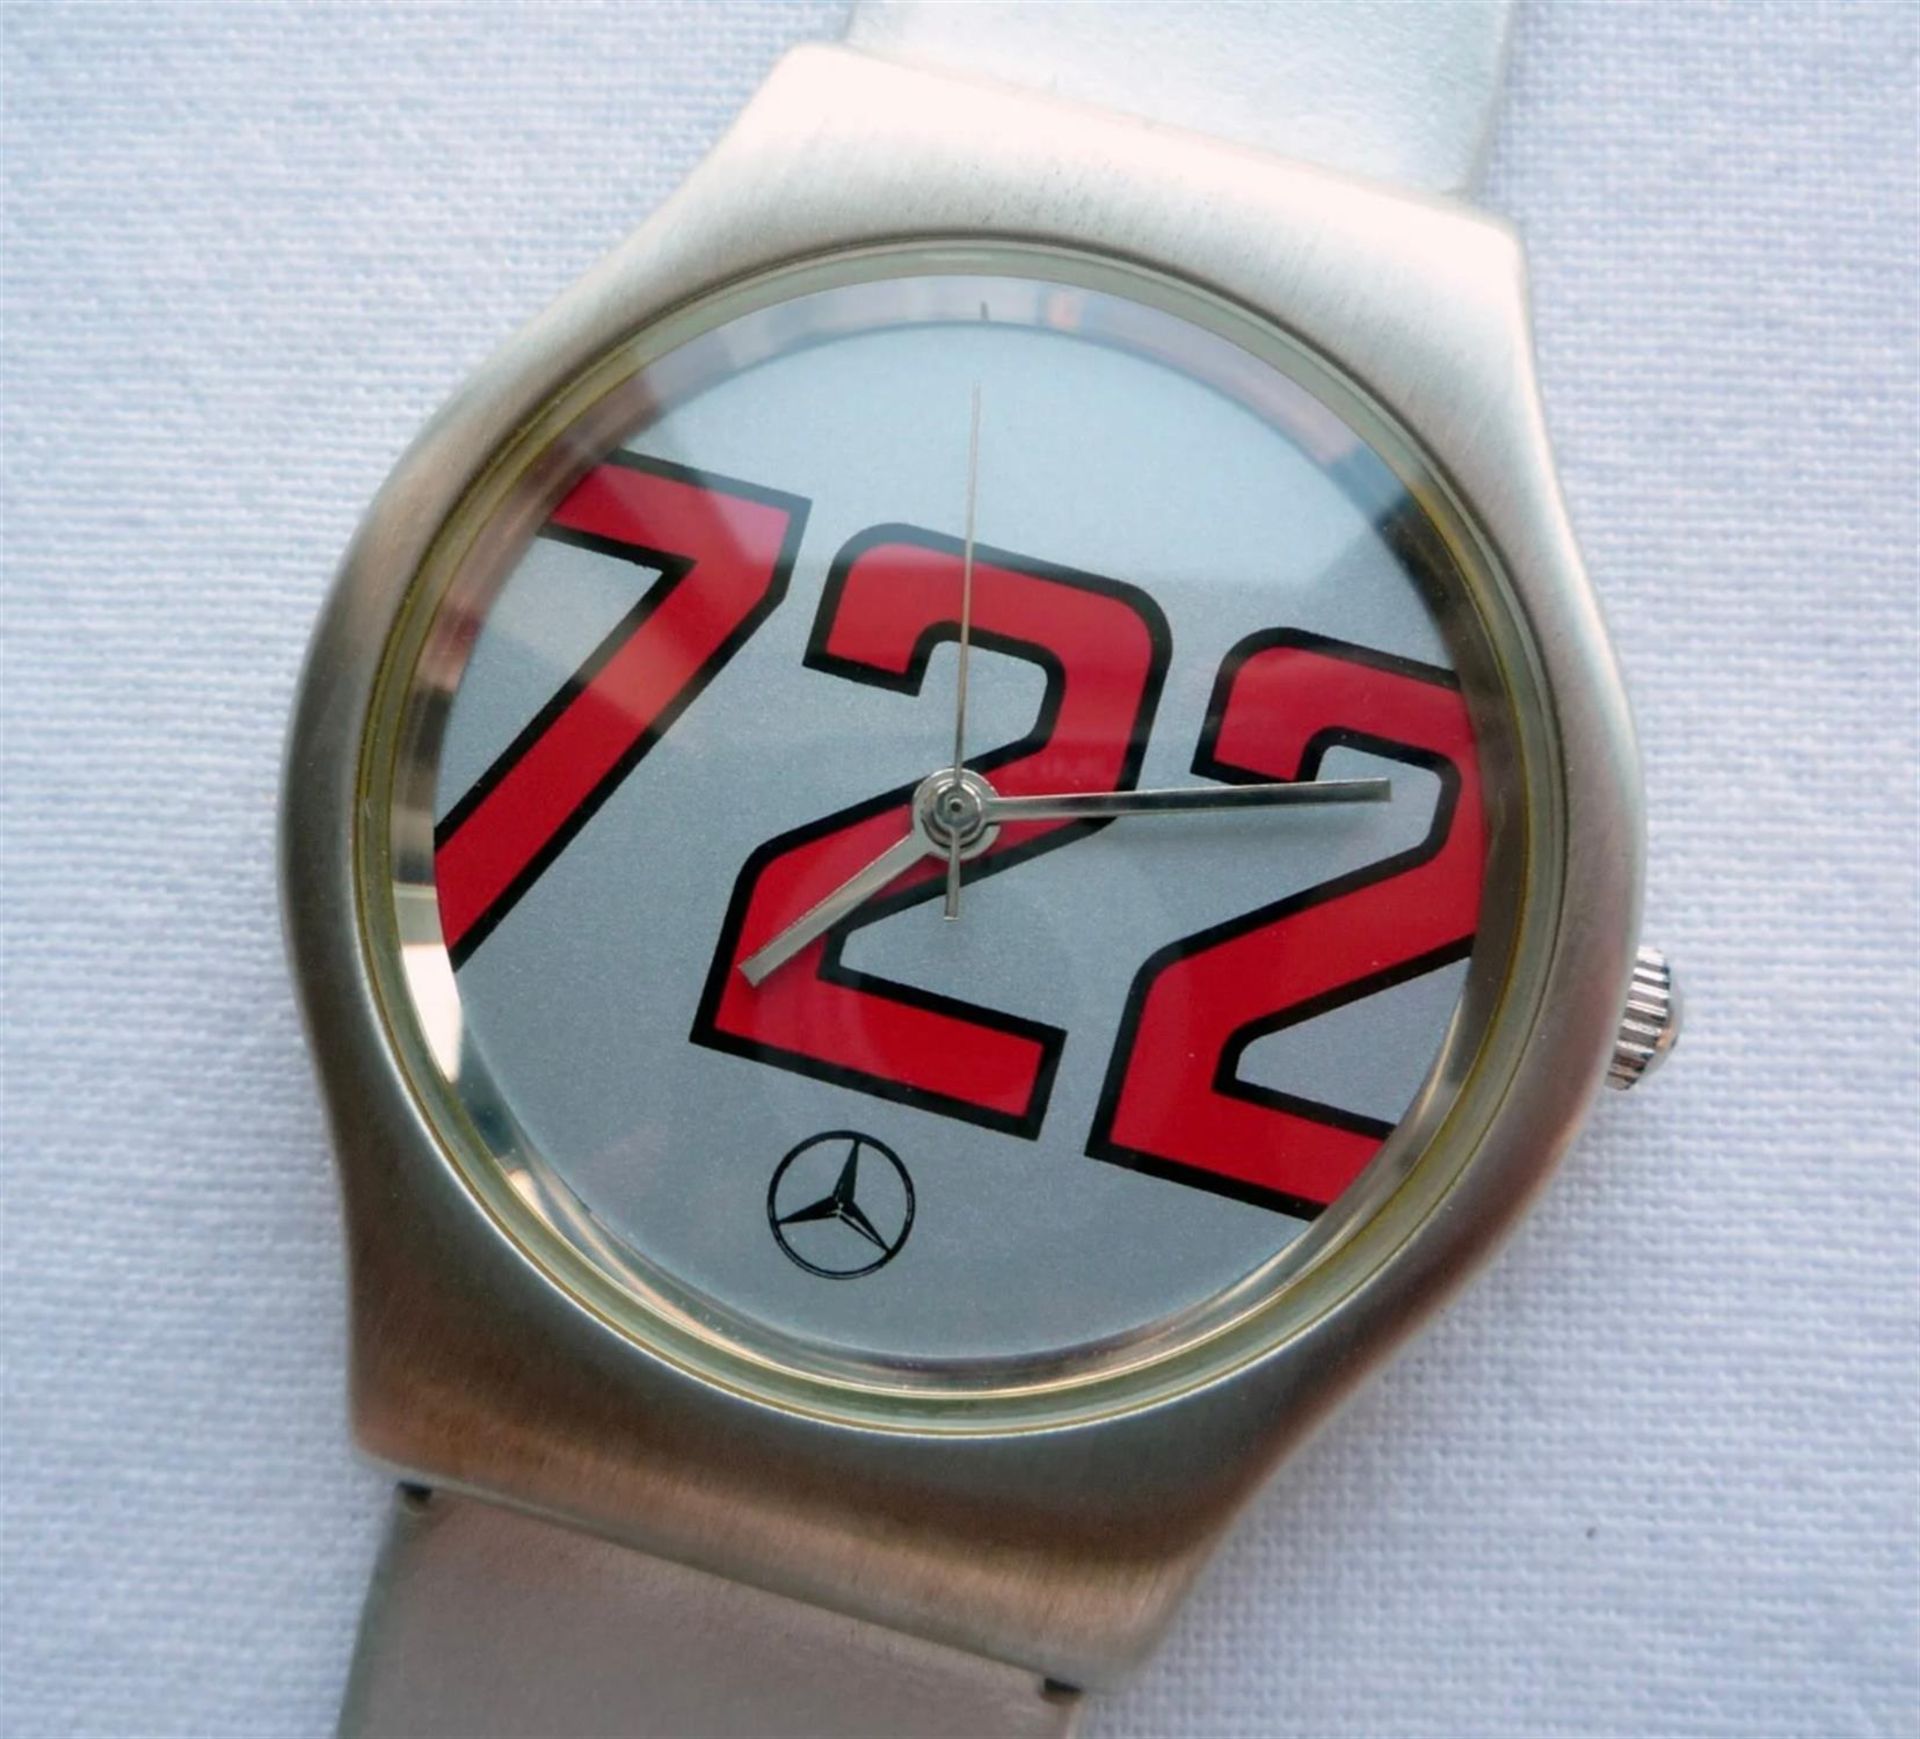 A Rare and Genuine Mercedes-Benz 722 Mille Miglia Classic Racing Watch - Image 3 of 10